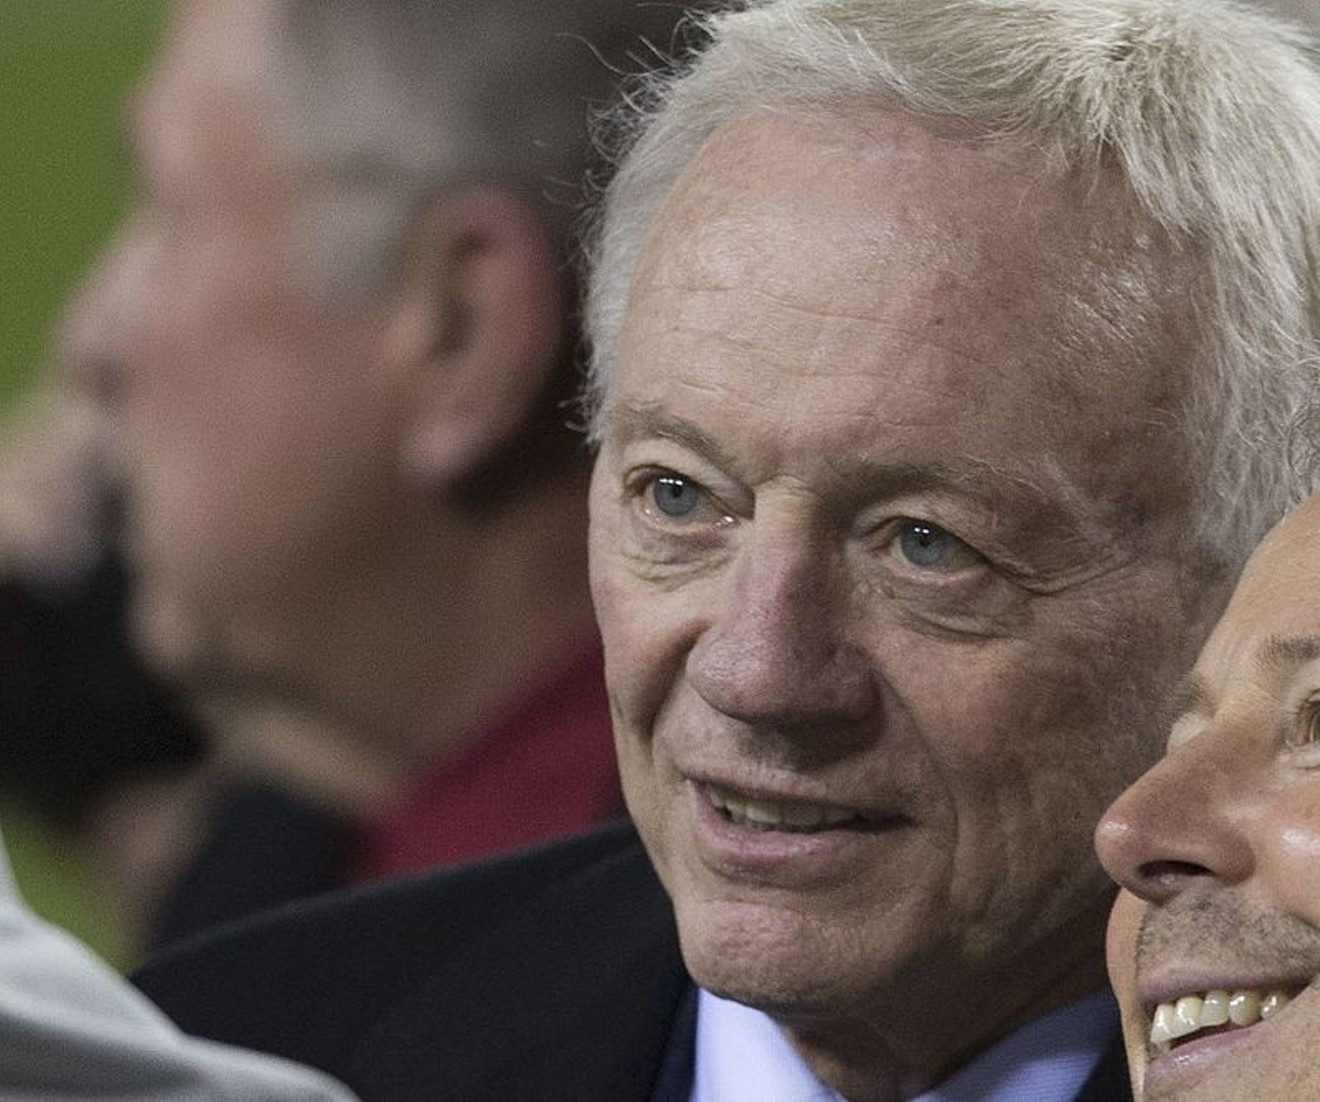 Jerry Jones has some thinking to do.